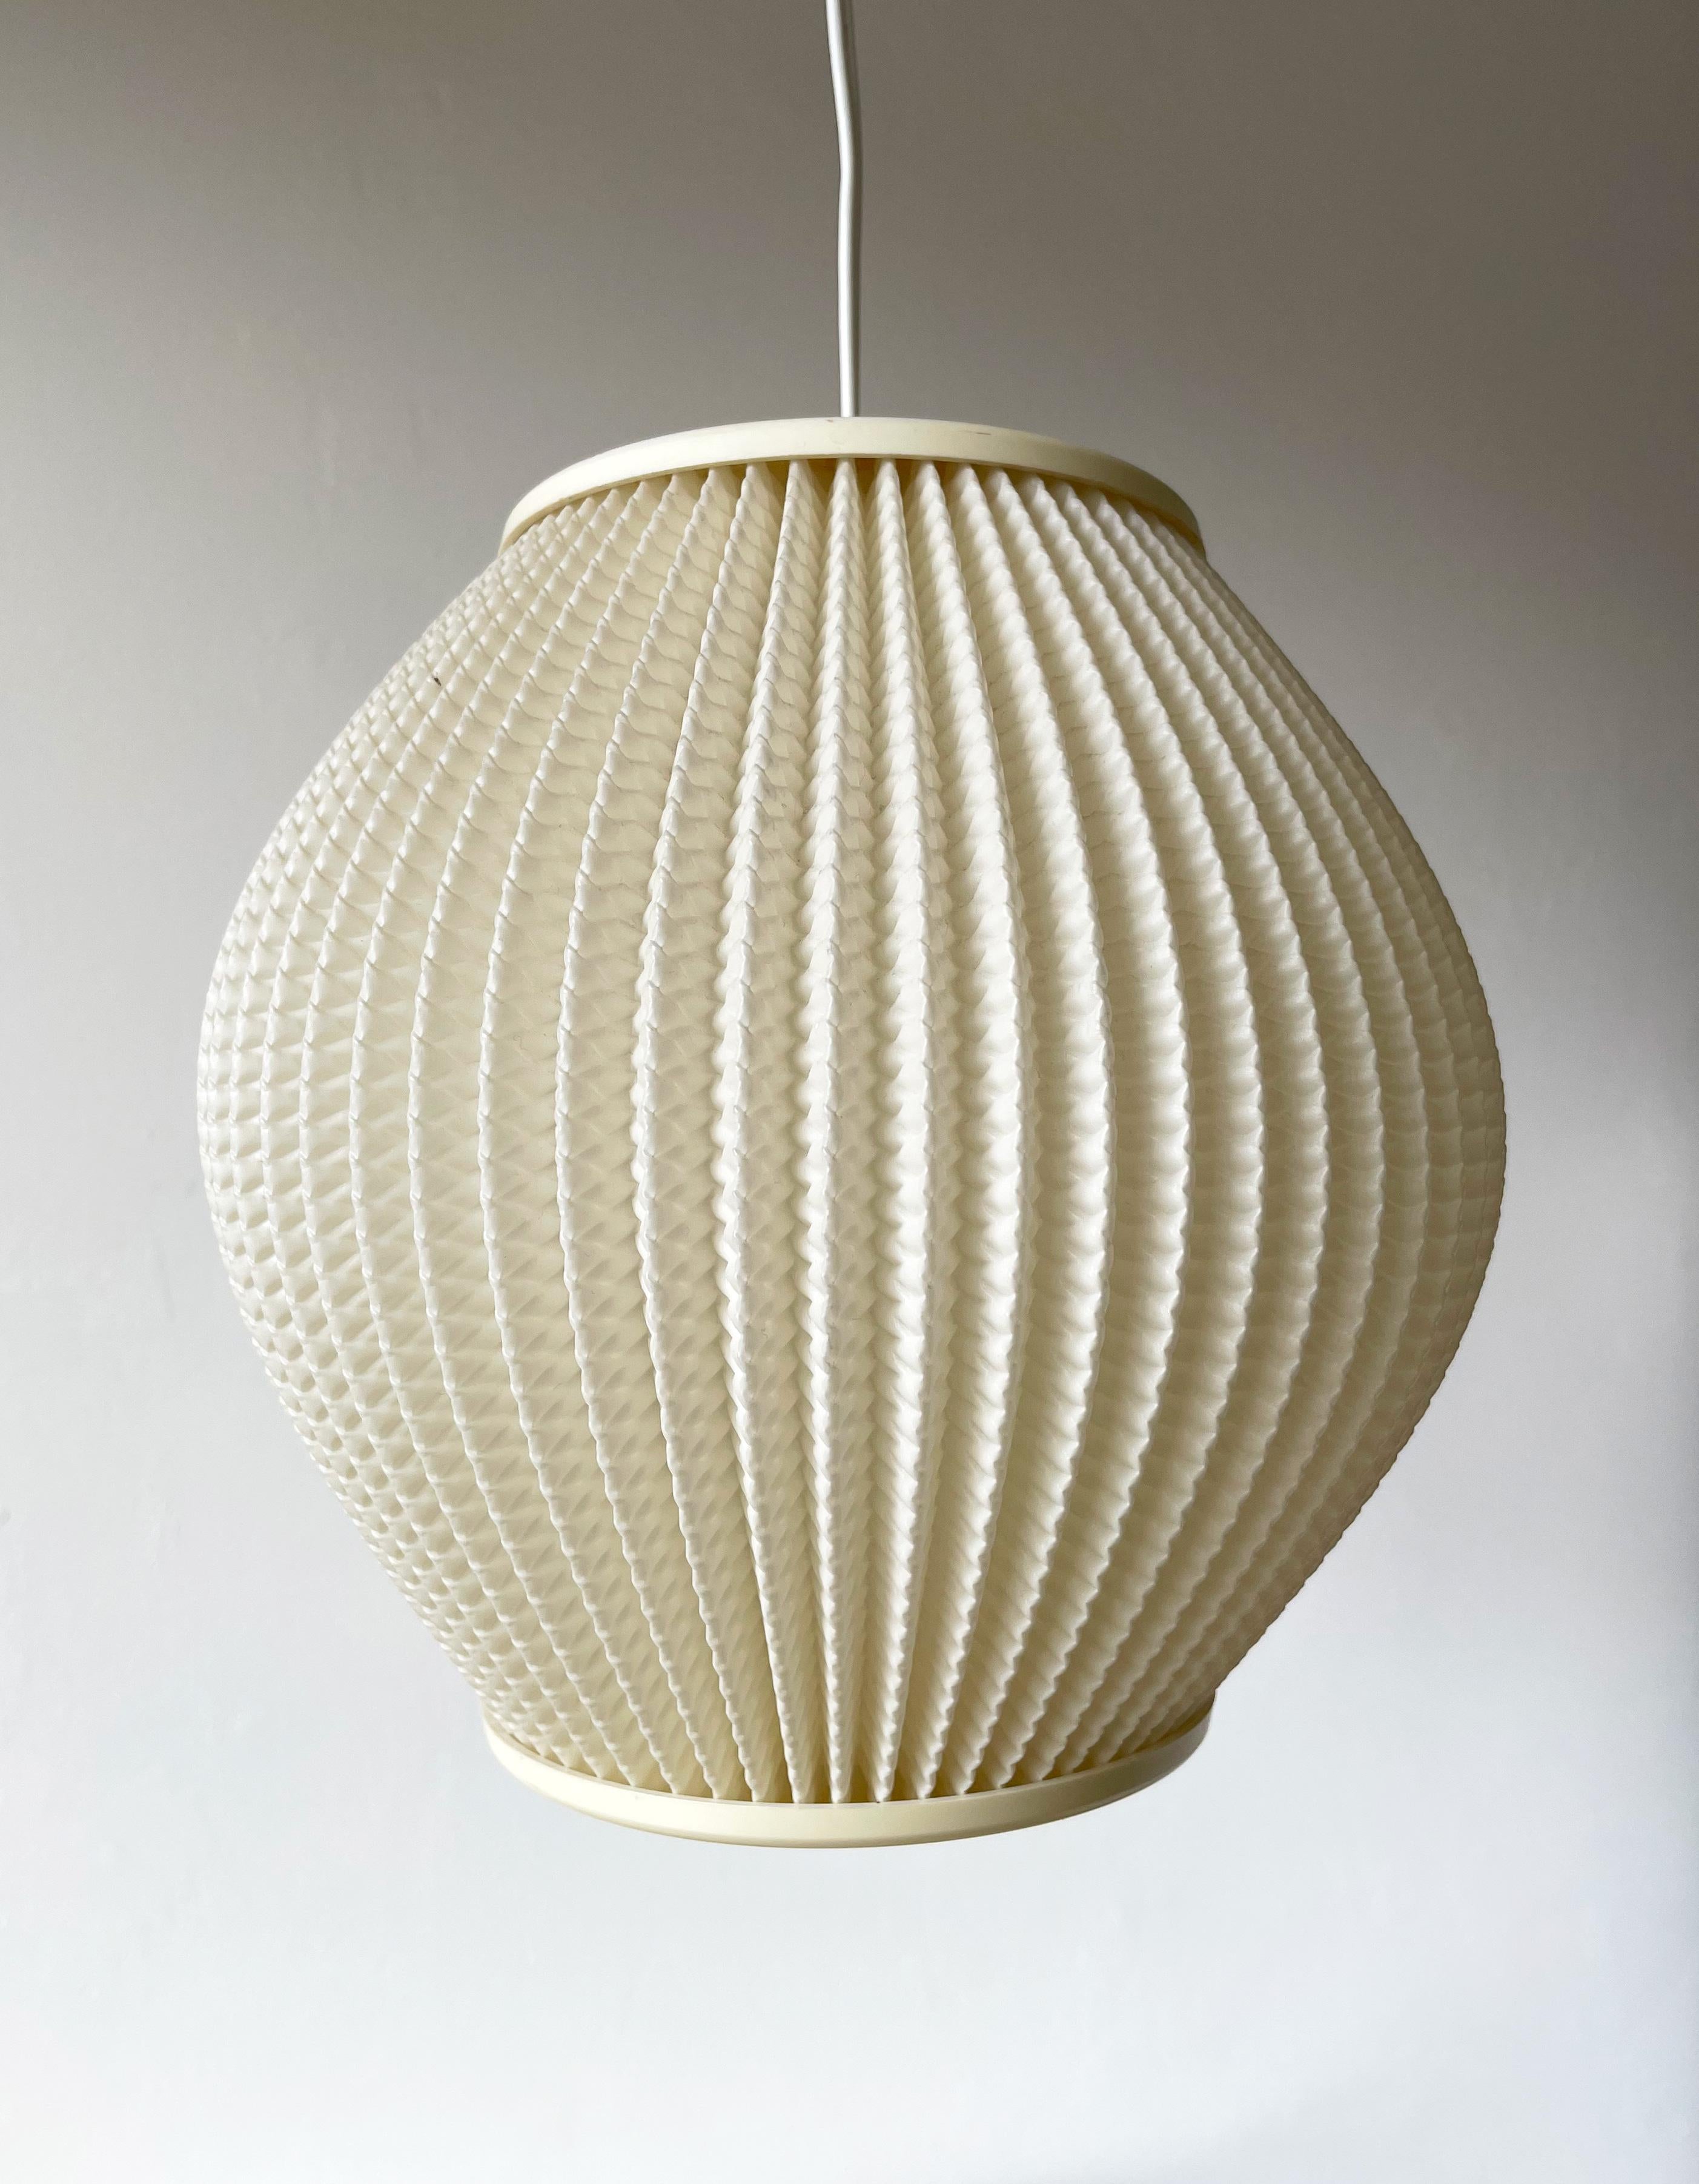 Danish Mid-Century Modern pleated acrylic pendant in a cream white color with cream top and bottom. Designed by Lars Eiler Schiøler in 1960 for Hoyrup light. Model 